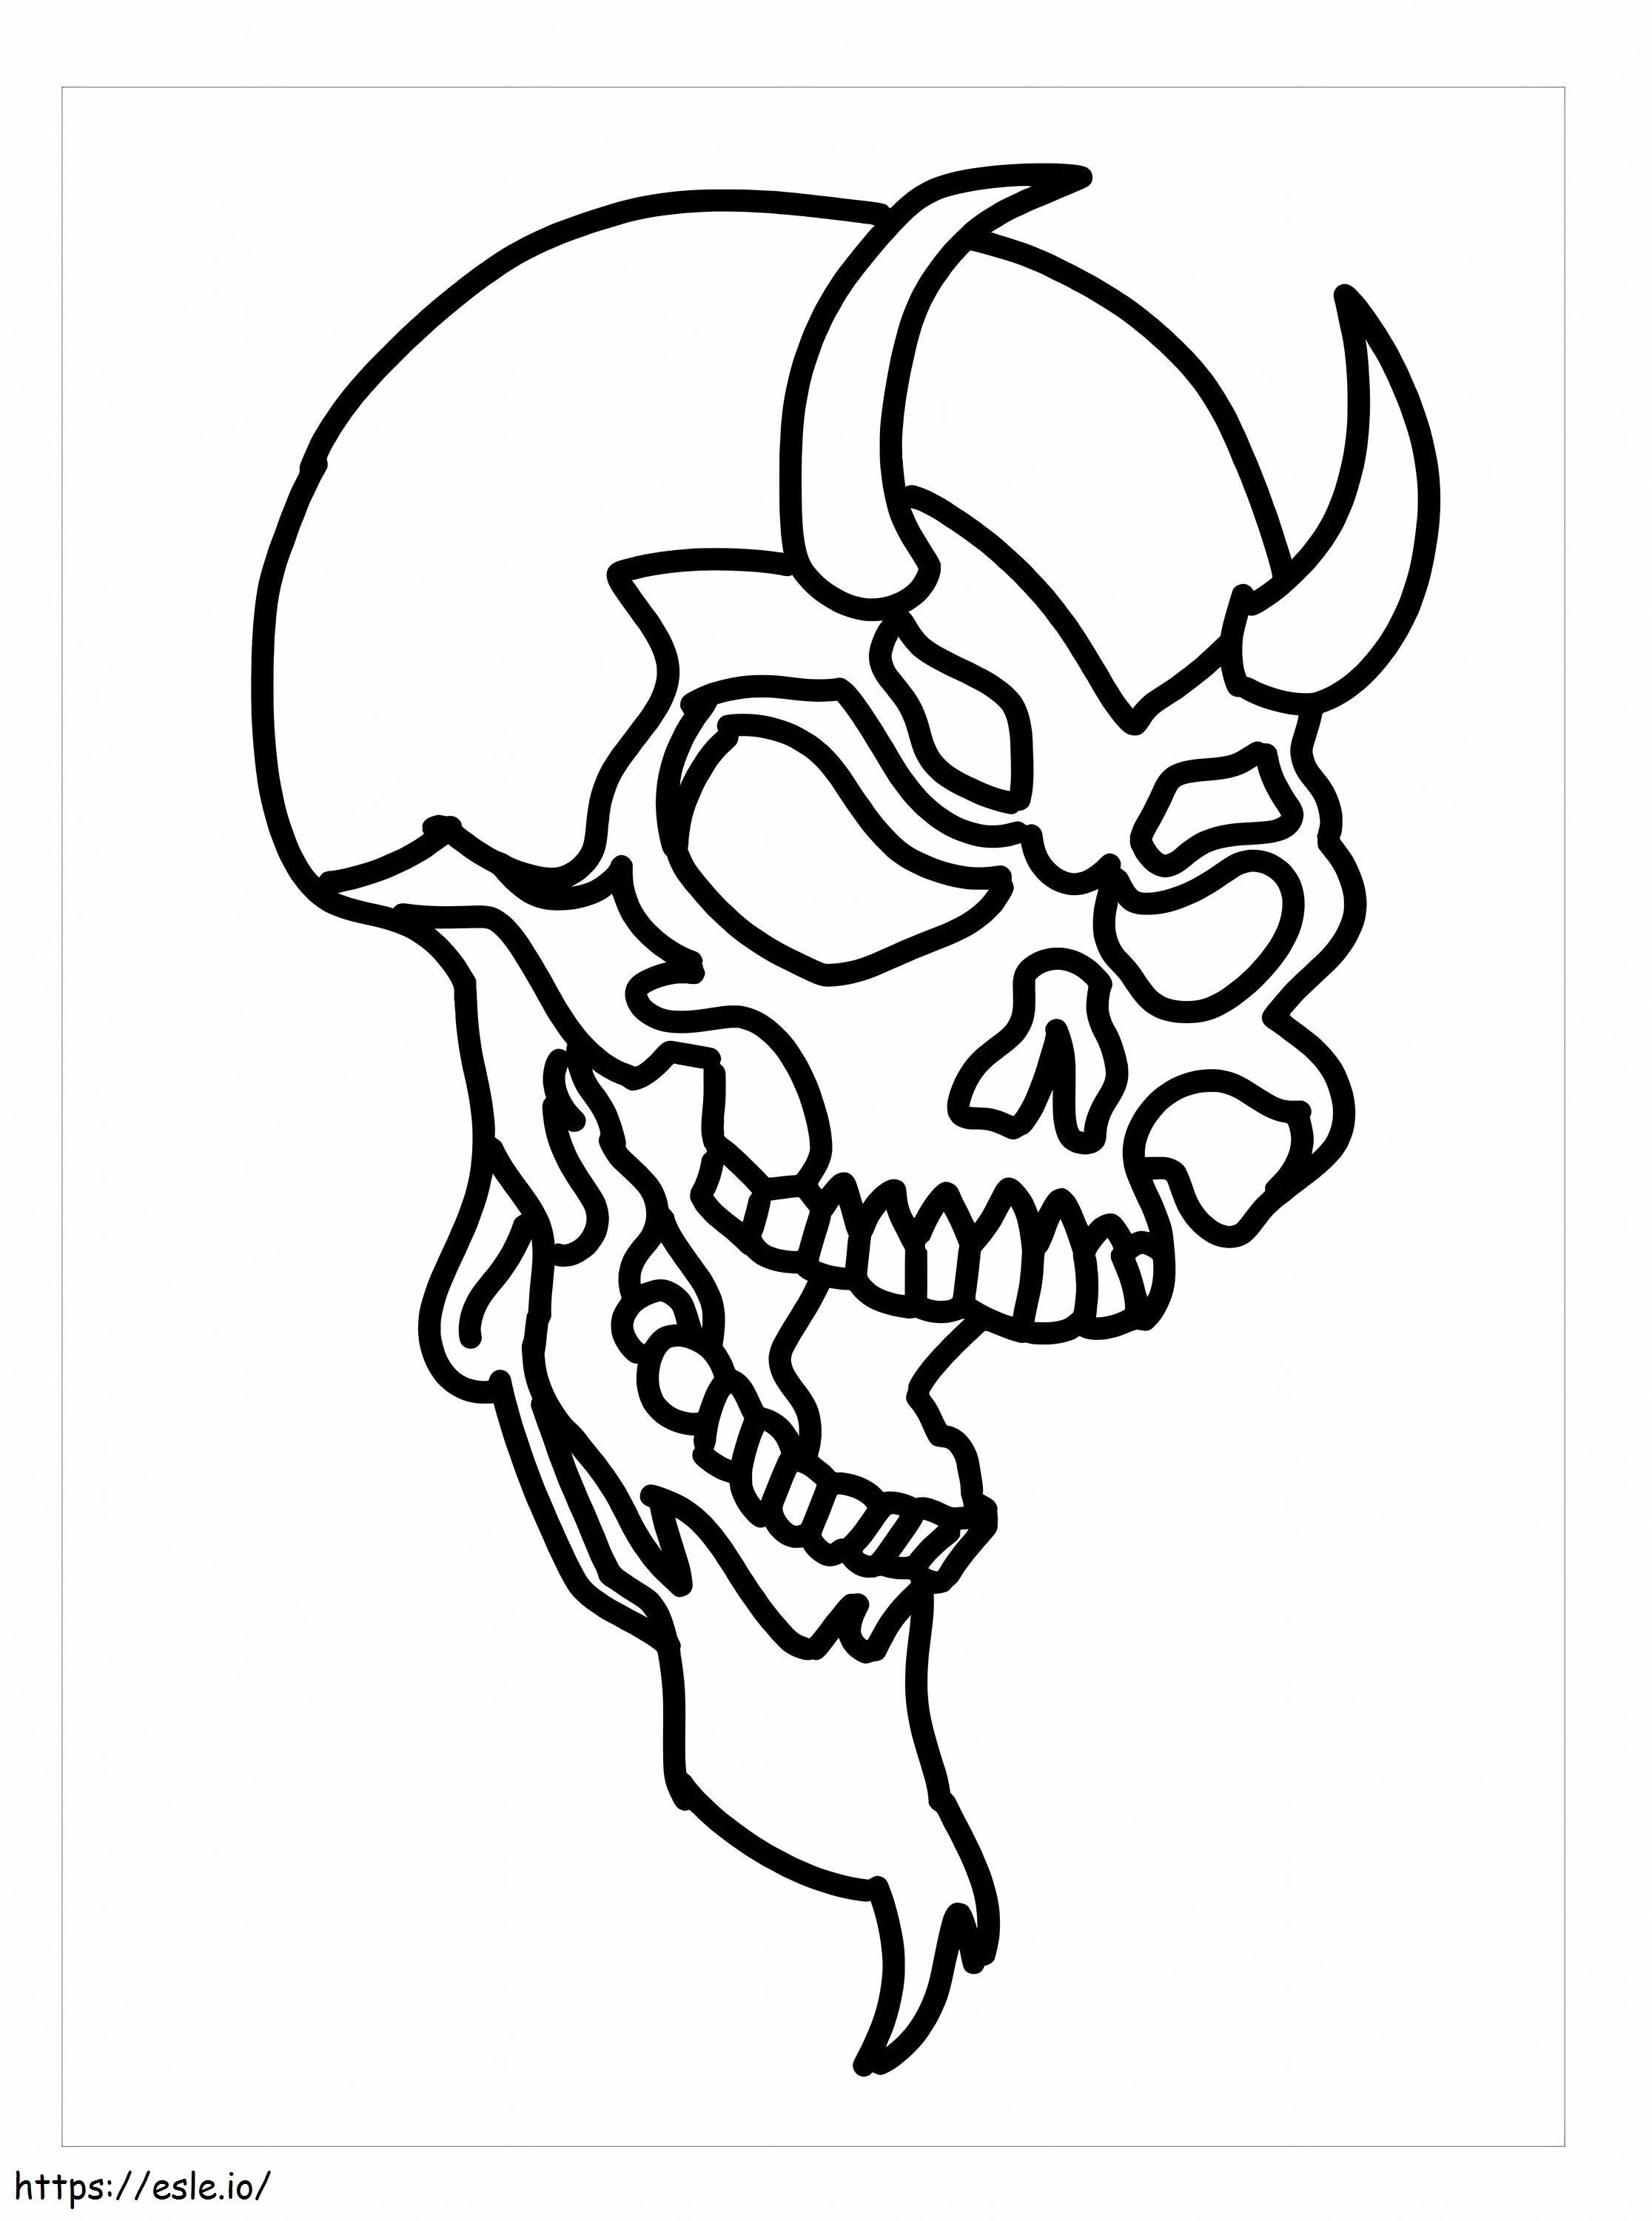 Evil Skull coloring page